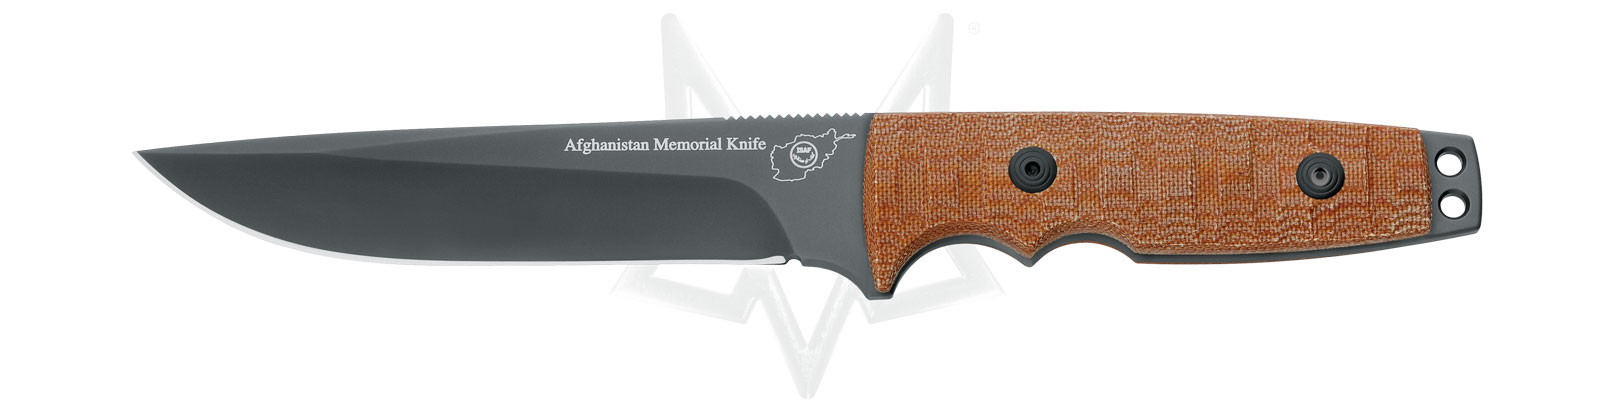 AFGANISTAN MEMORIAL KNIVE DESIGN BY HILL KNIVES